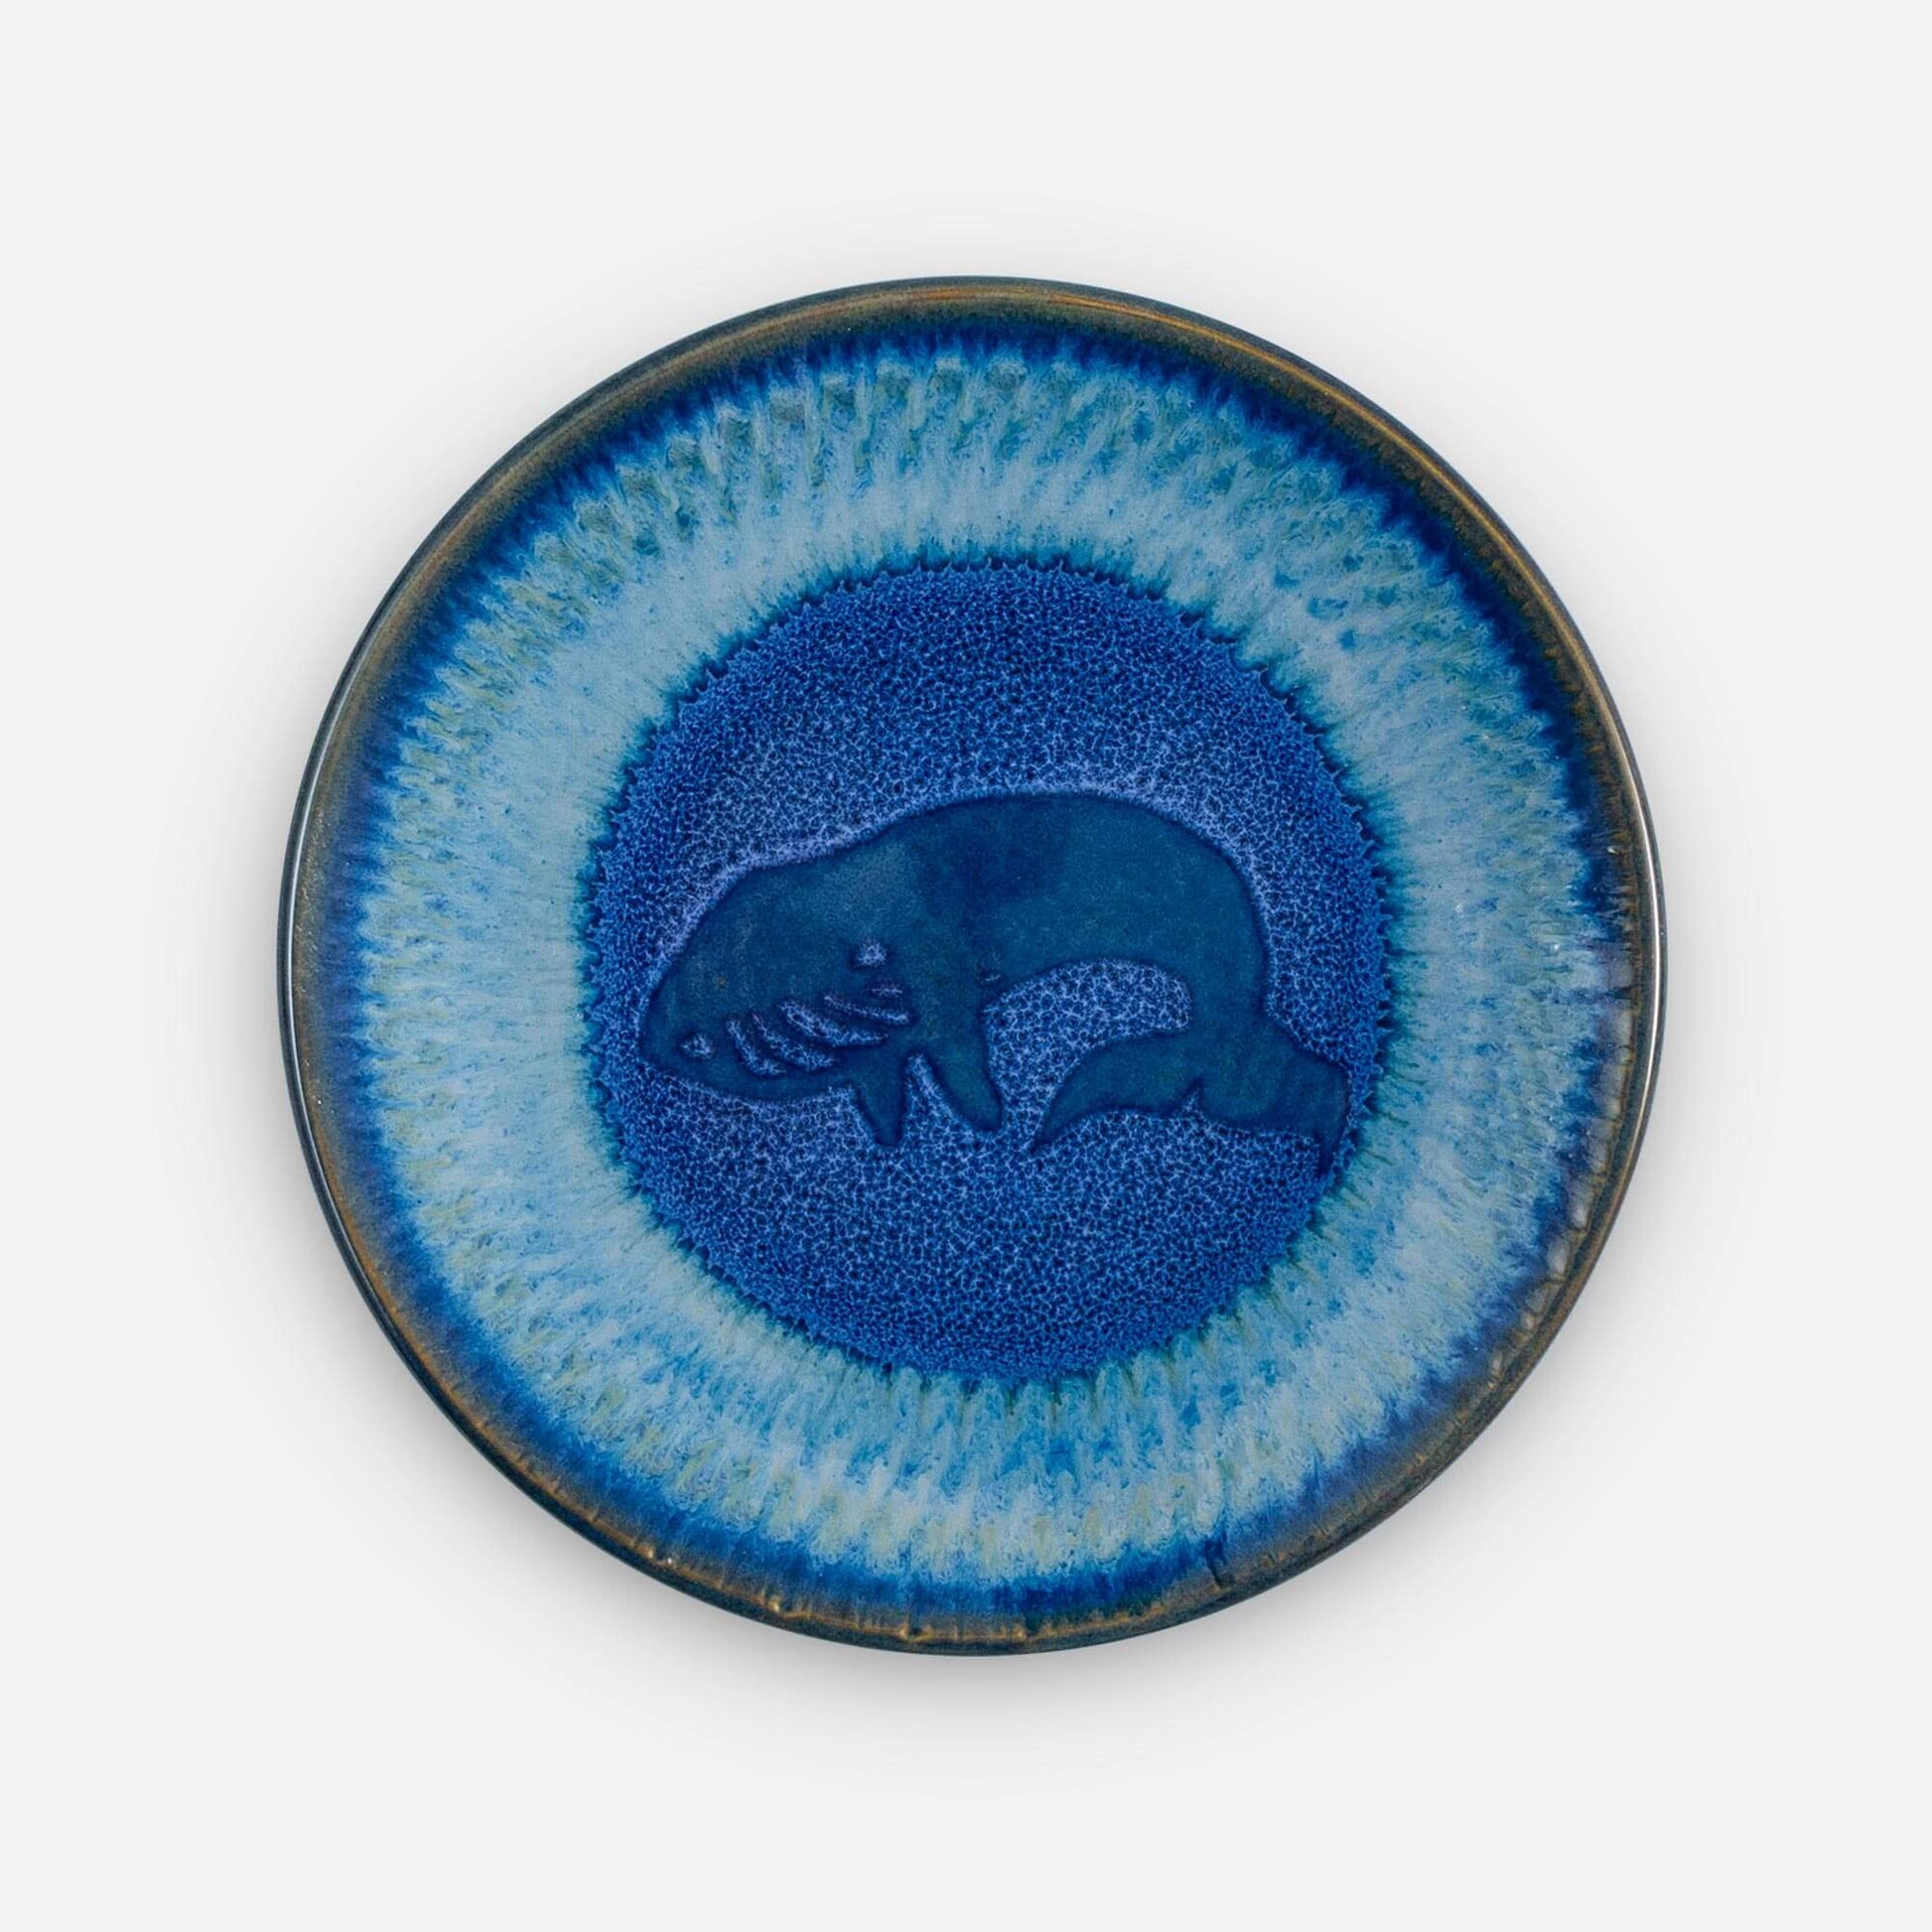 Handmade Pottery Rimless Dessert Plate made by Georgetown Pottery in Maine in Blue Whale Pattern